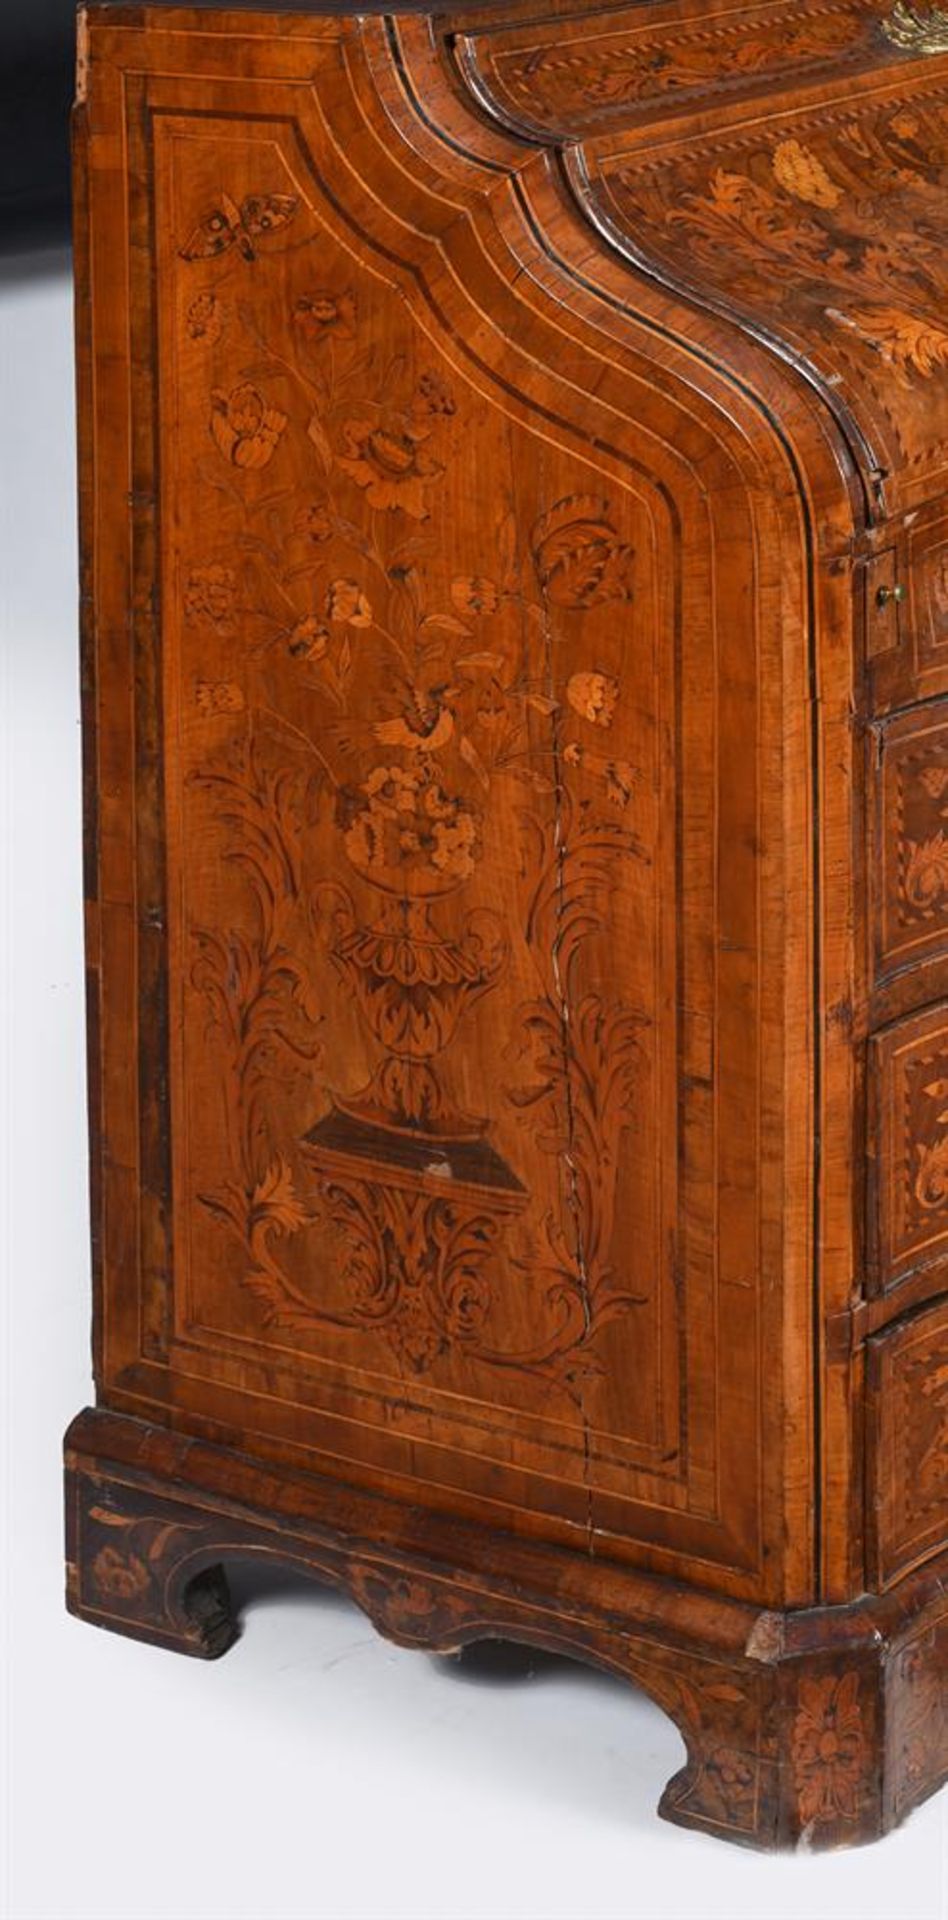 A DUTCH WALNUT AND SPECIMEN MARQUETRY SERPENTINE FRONTED BUREAU, LATE 18TH CENTURY - Image 6 of 6